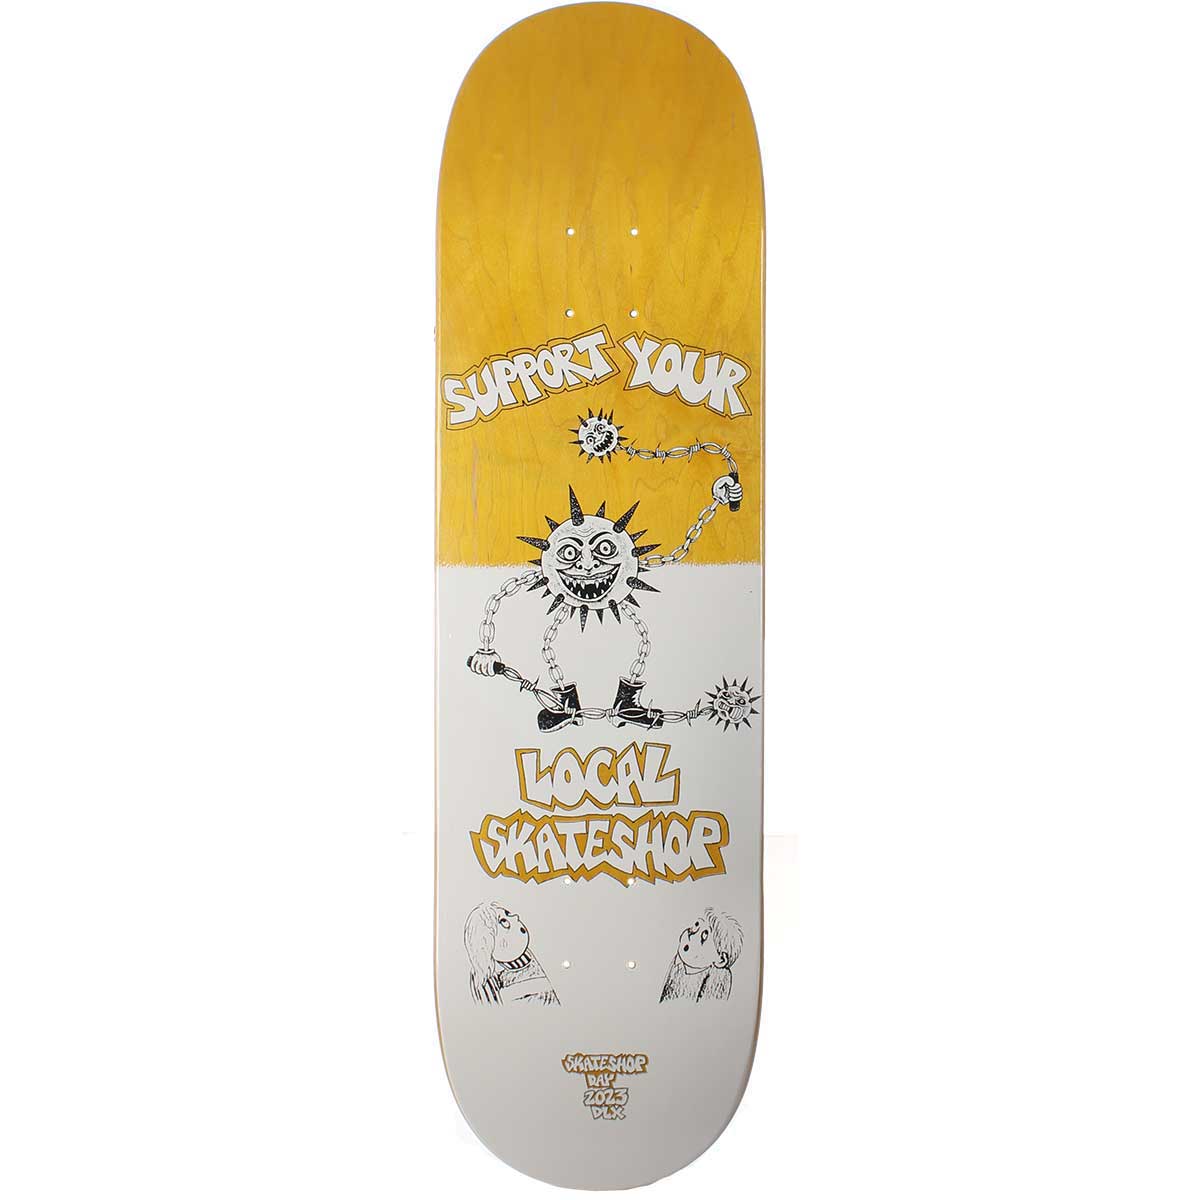 uitsterven 945 cabine Deluxe Support Your Local Skateshop Skateboard Deck - Yellow Stain 8.5x31.8  | SoCal Skateshop